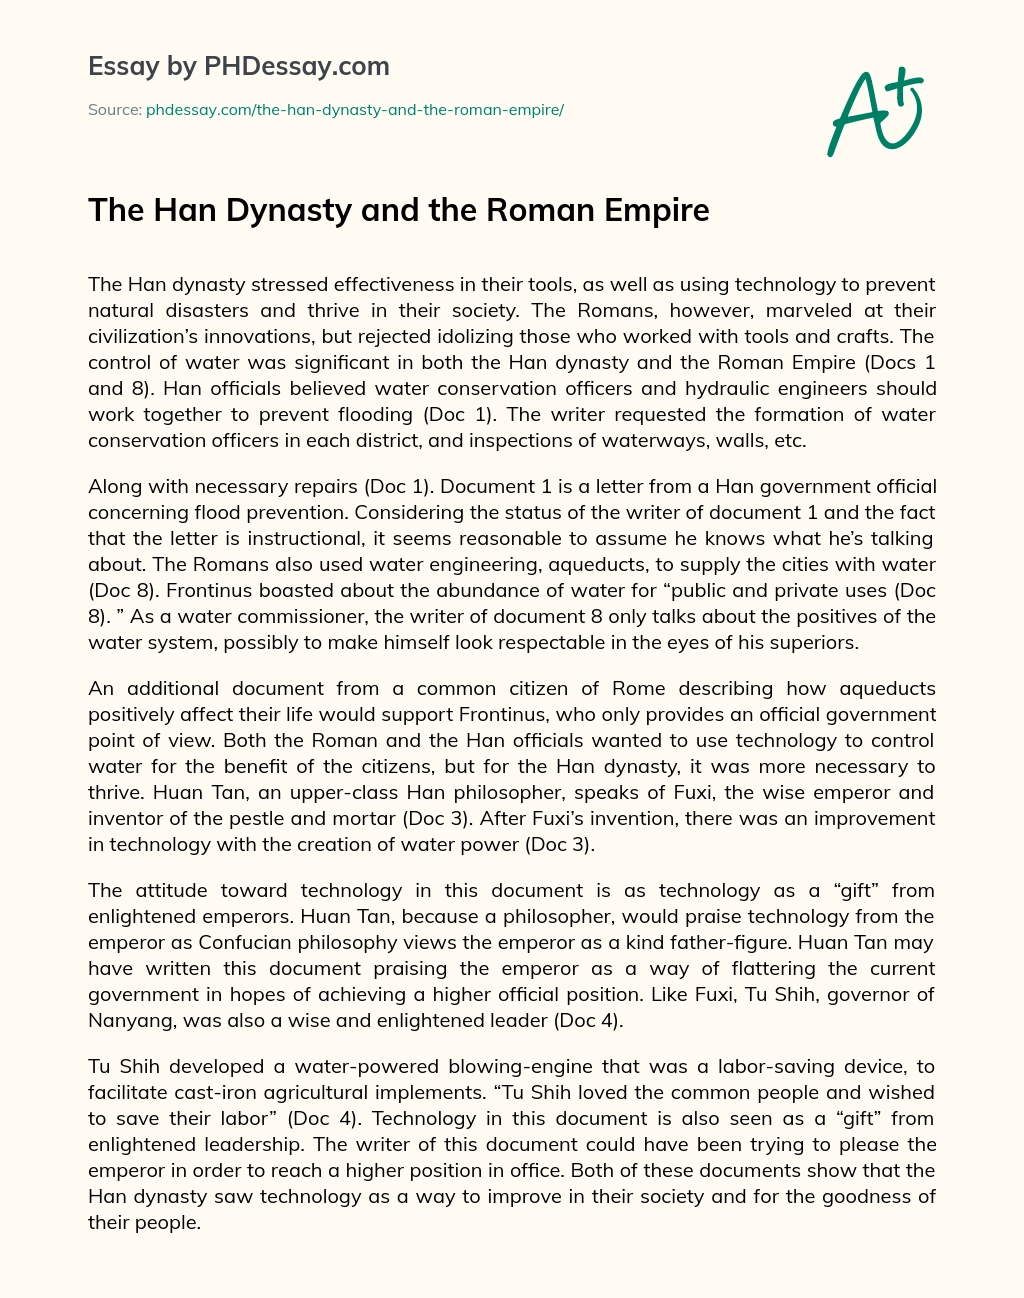 The Han Dynasty and the Roman Empire essay